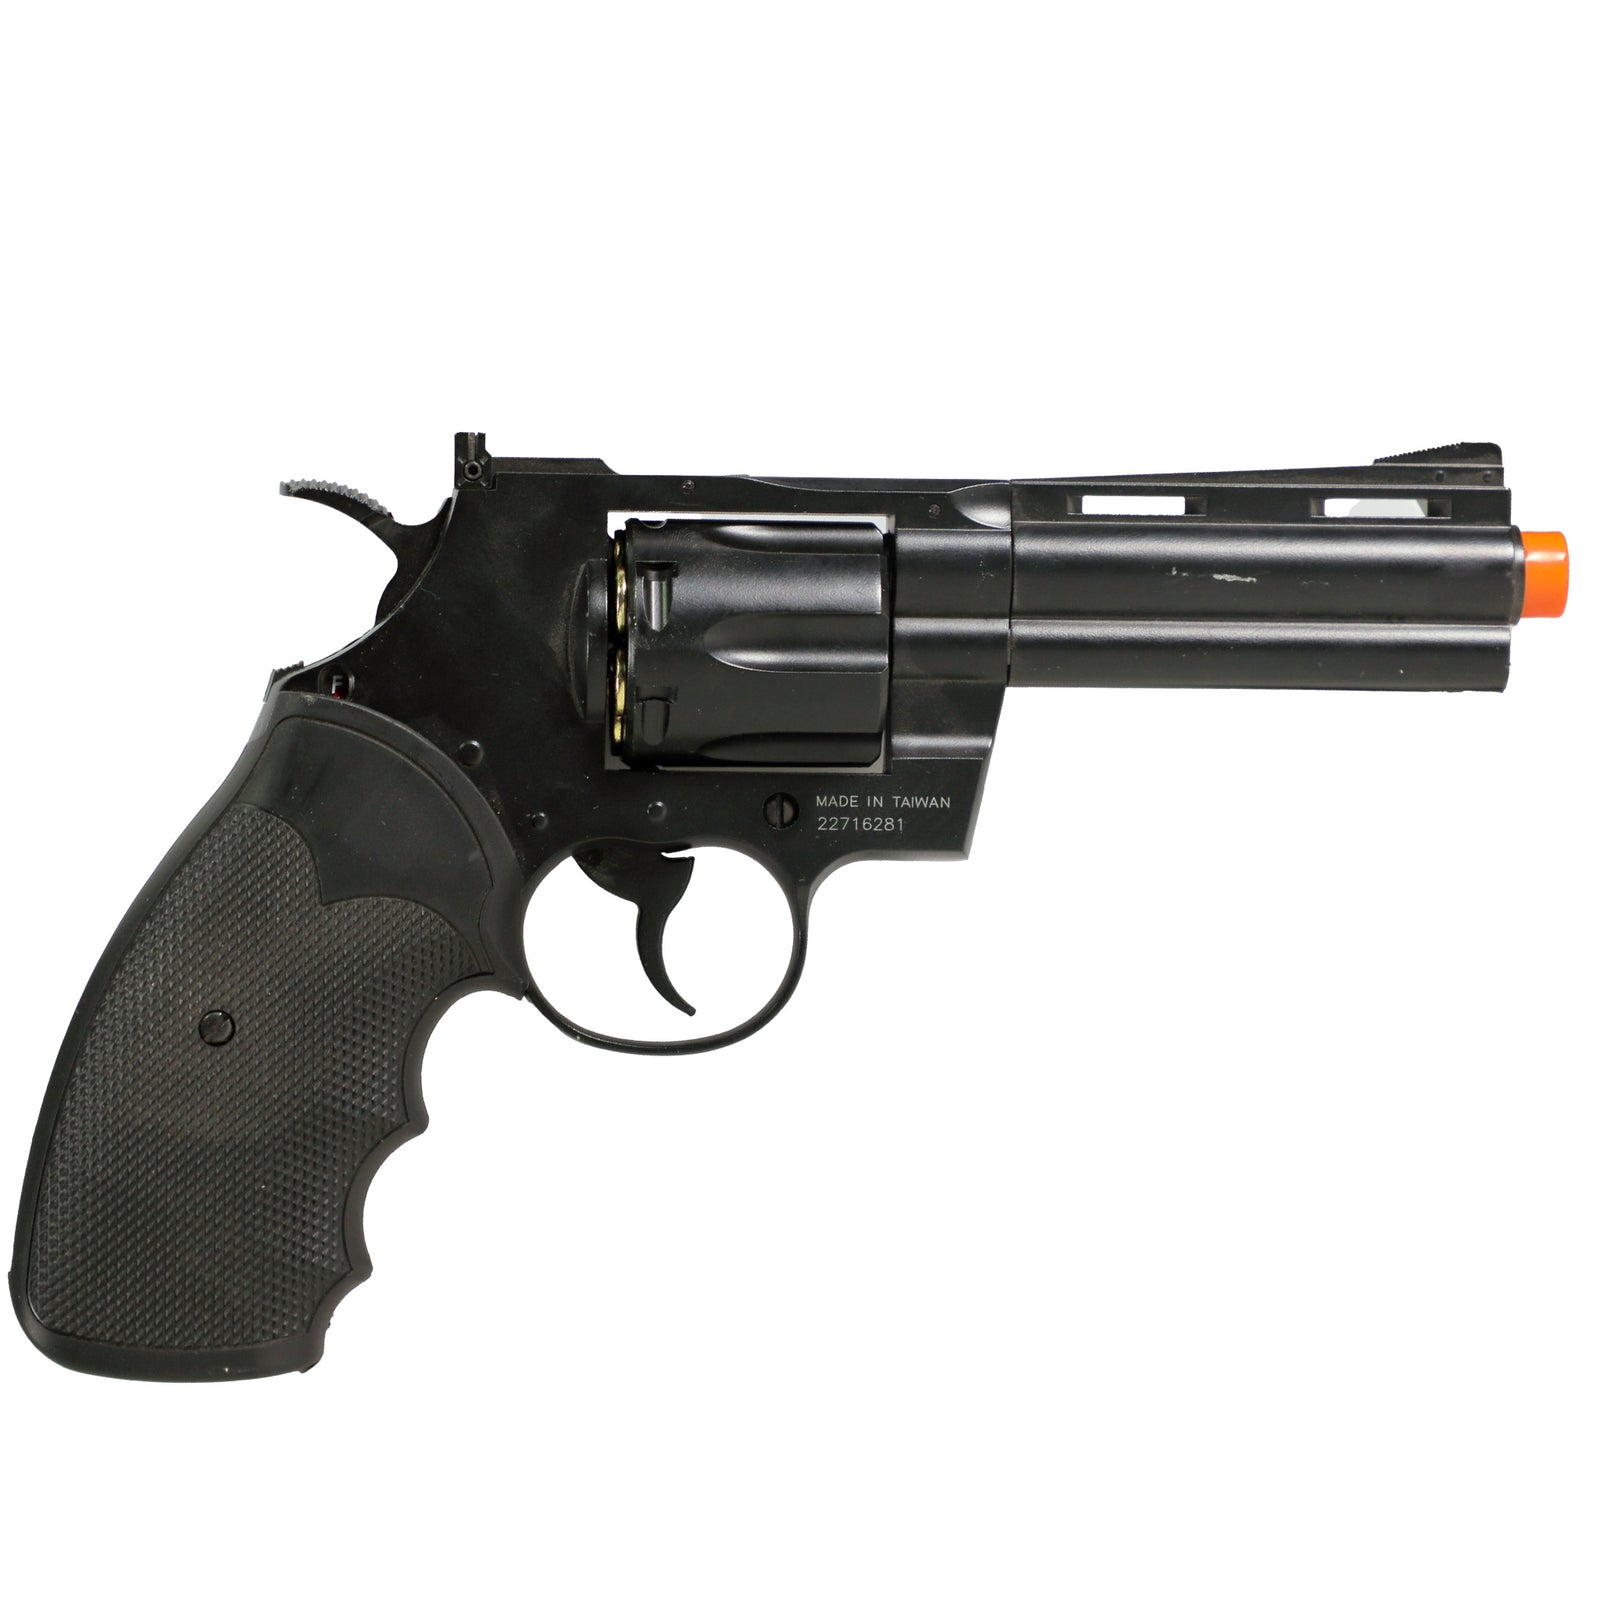 Colt Python 4 - Revolver - Airsoft store, replicas and military clothing  with real stock and shipments in 24 working hours.